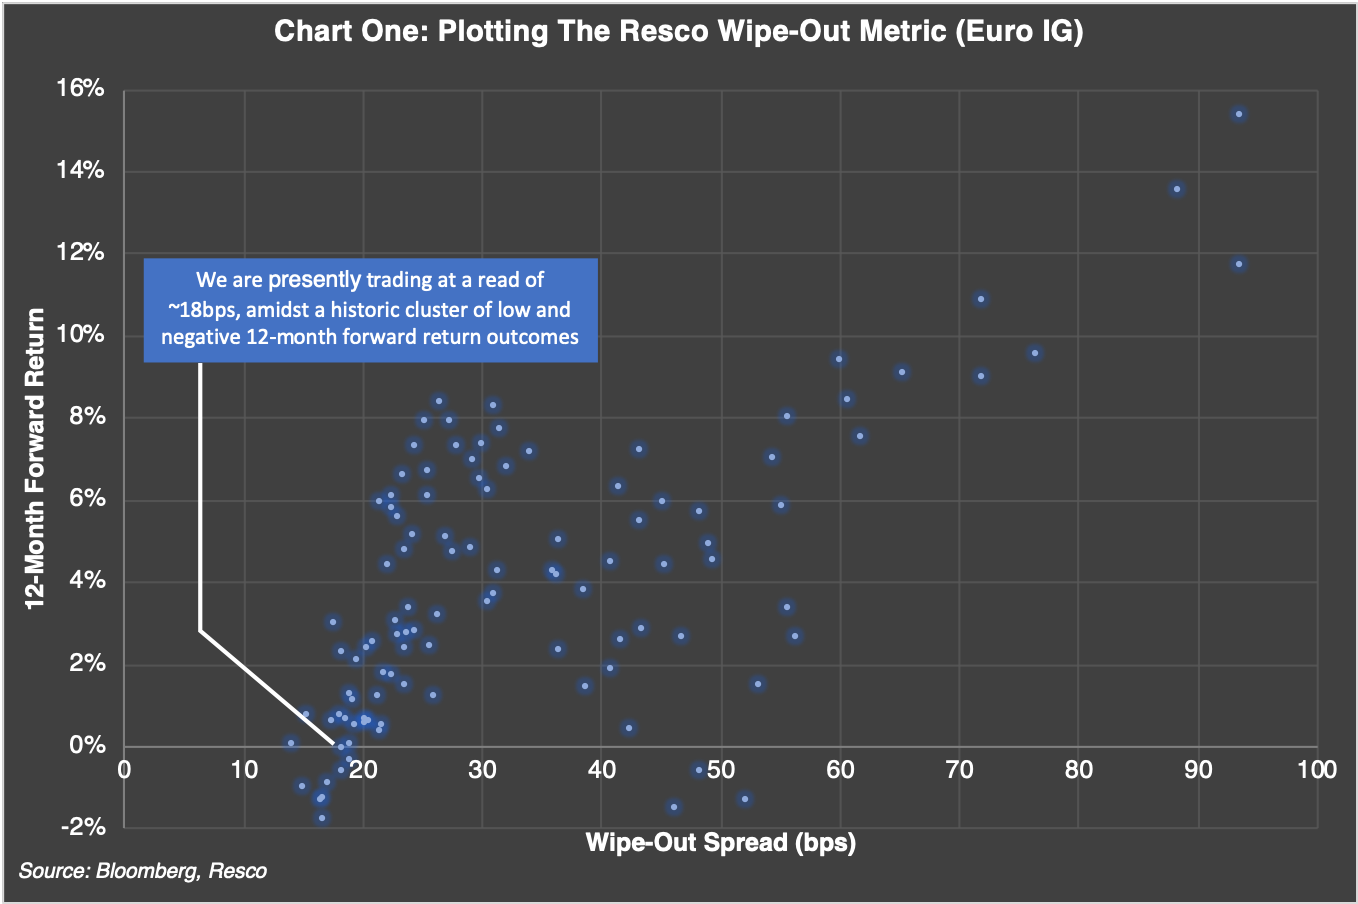 The Resco Wipe-Out Metric